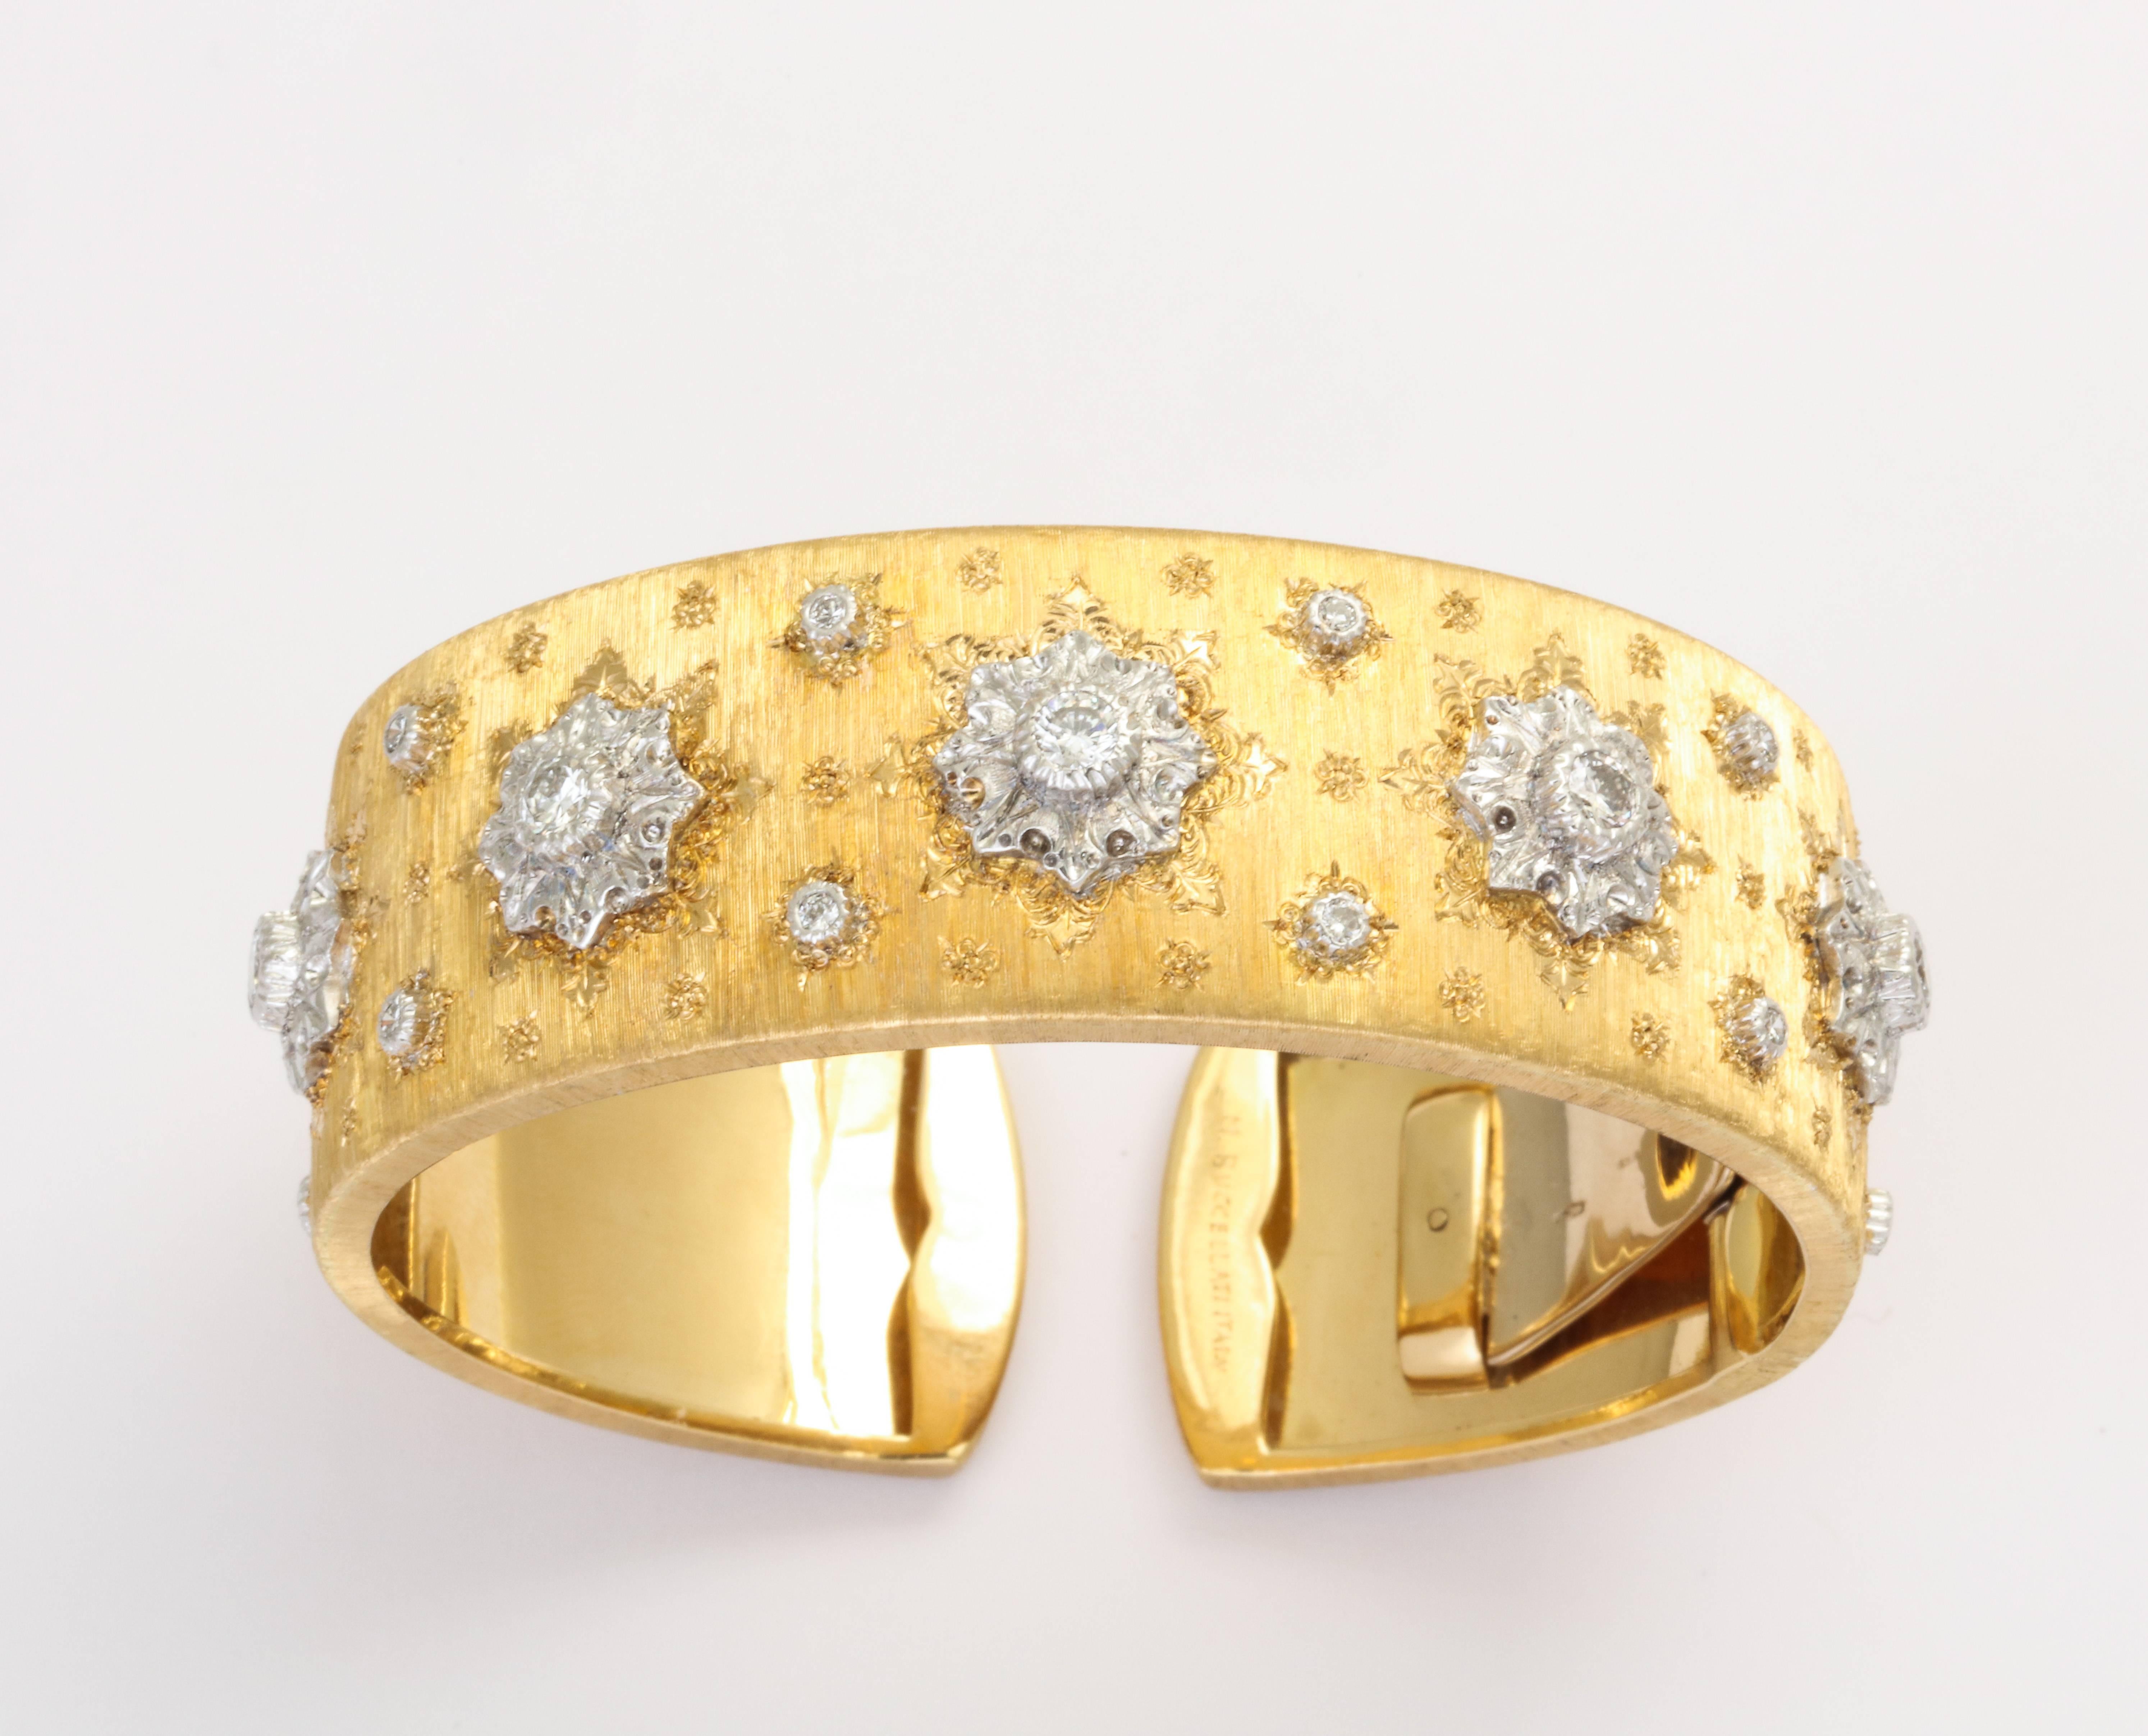 An 18 karat yellow gold hand engraved diamond cuff bracelet by Mario Buccellati. Made in Italy. The bracelet has an estimated total diamond weight of 1.05 carats. Circa 1980s. With a hinged arm, the interior measures 6 1/4 inches.  Super-stylish,